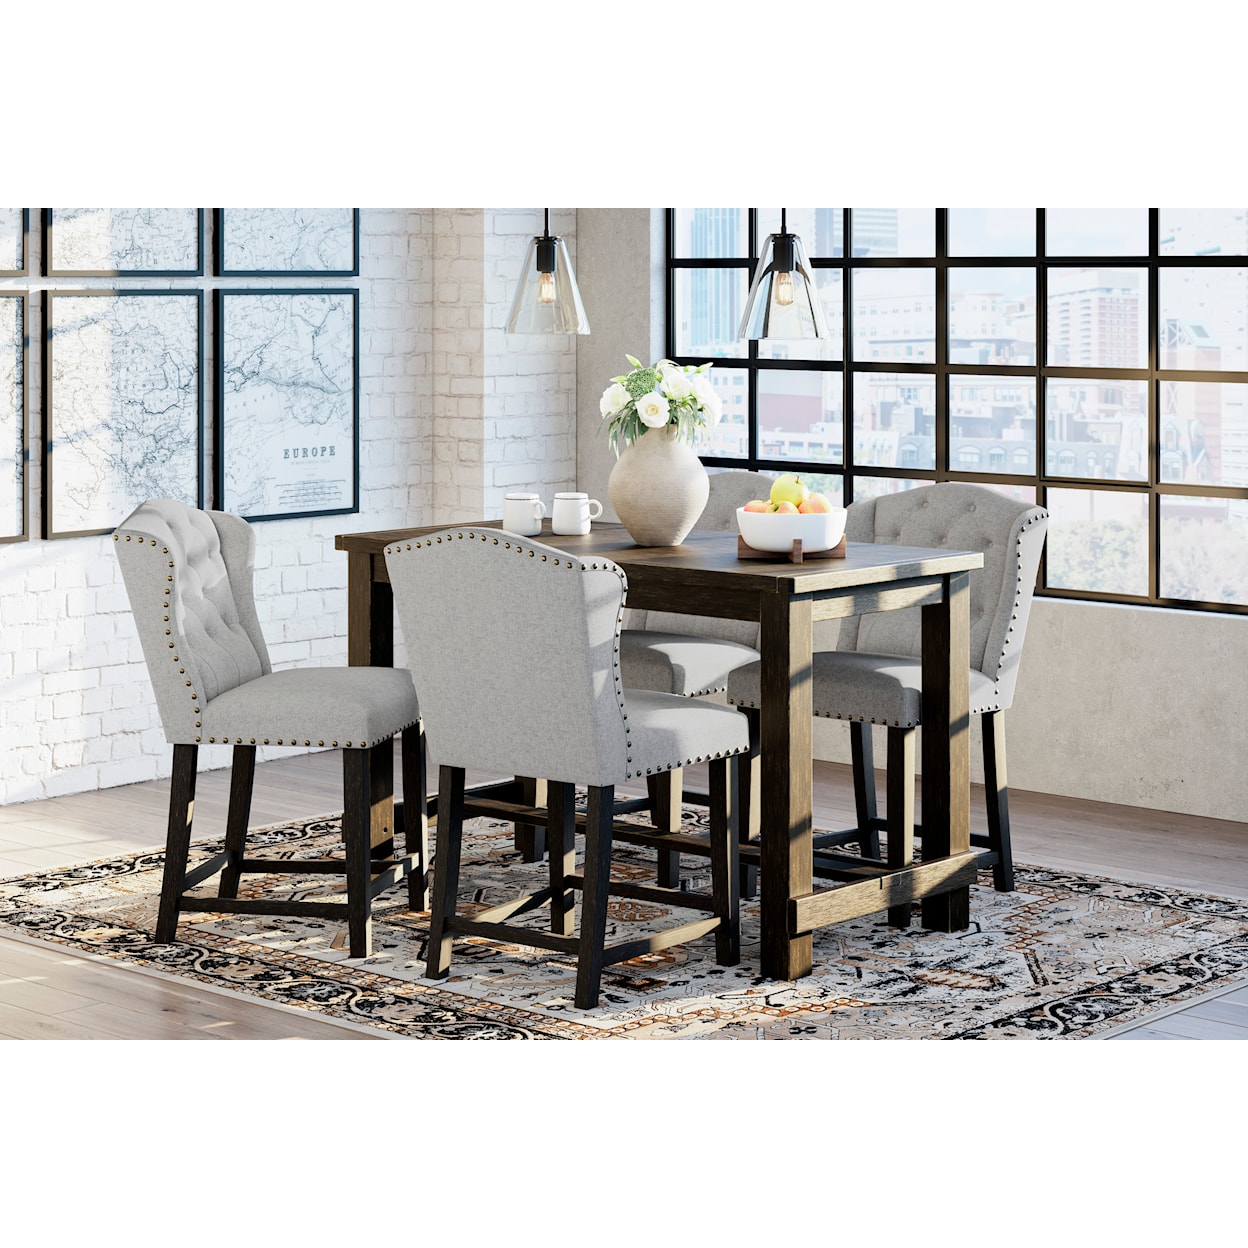 Signature Design by Ashley Jeanette 5-Piece Counter Set